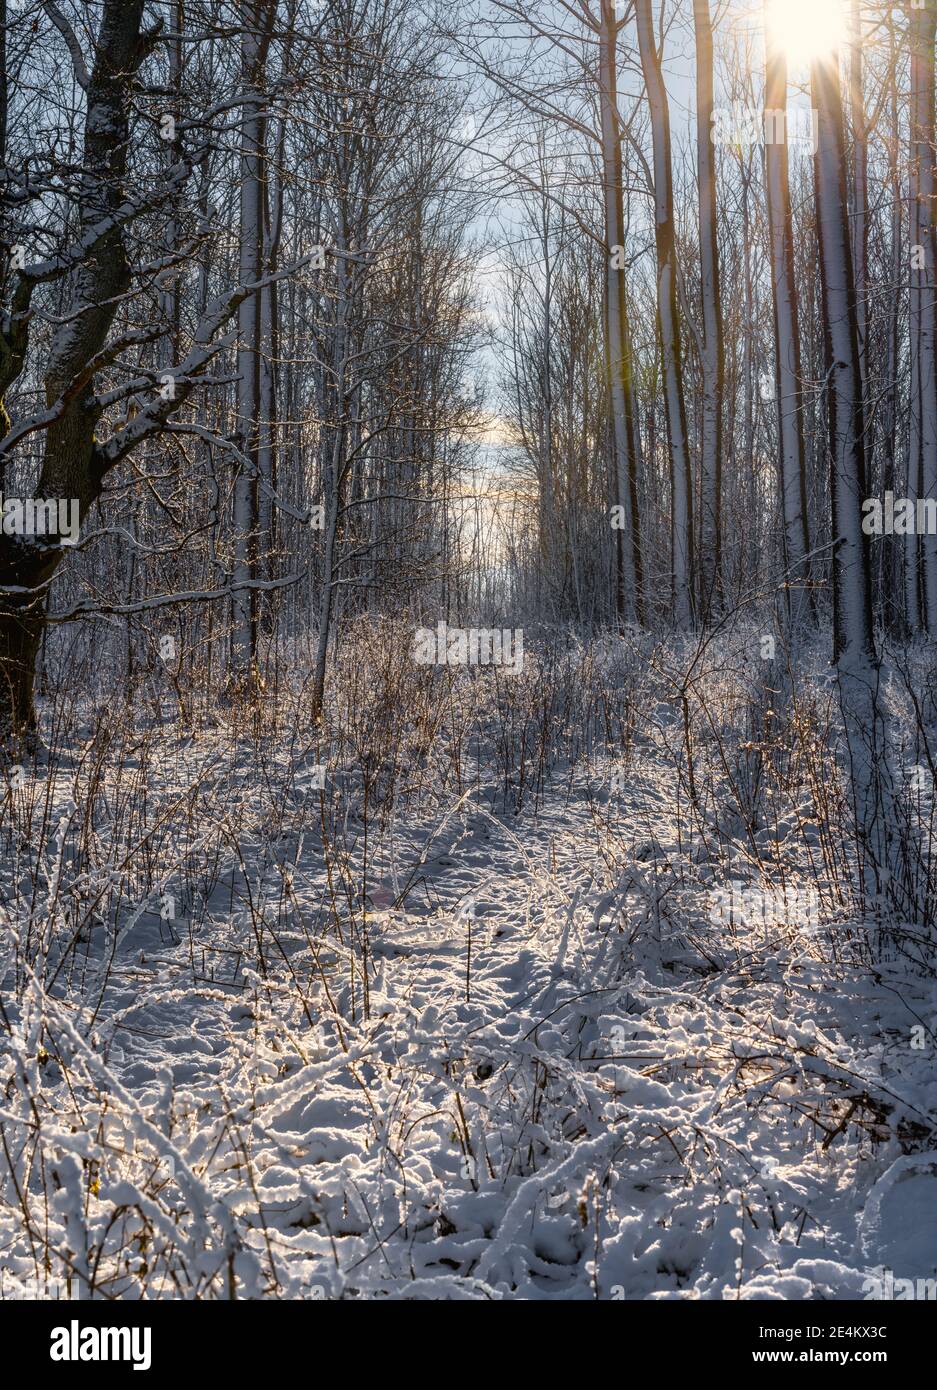 A backlit photo of a forest glade covered in snow a crispy cold winter day. Picture from Eslov, southern Sweden Stock Photo